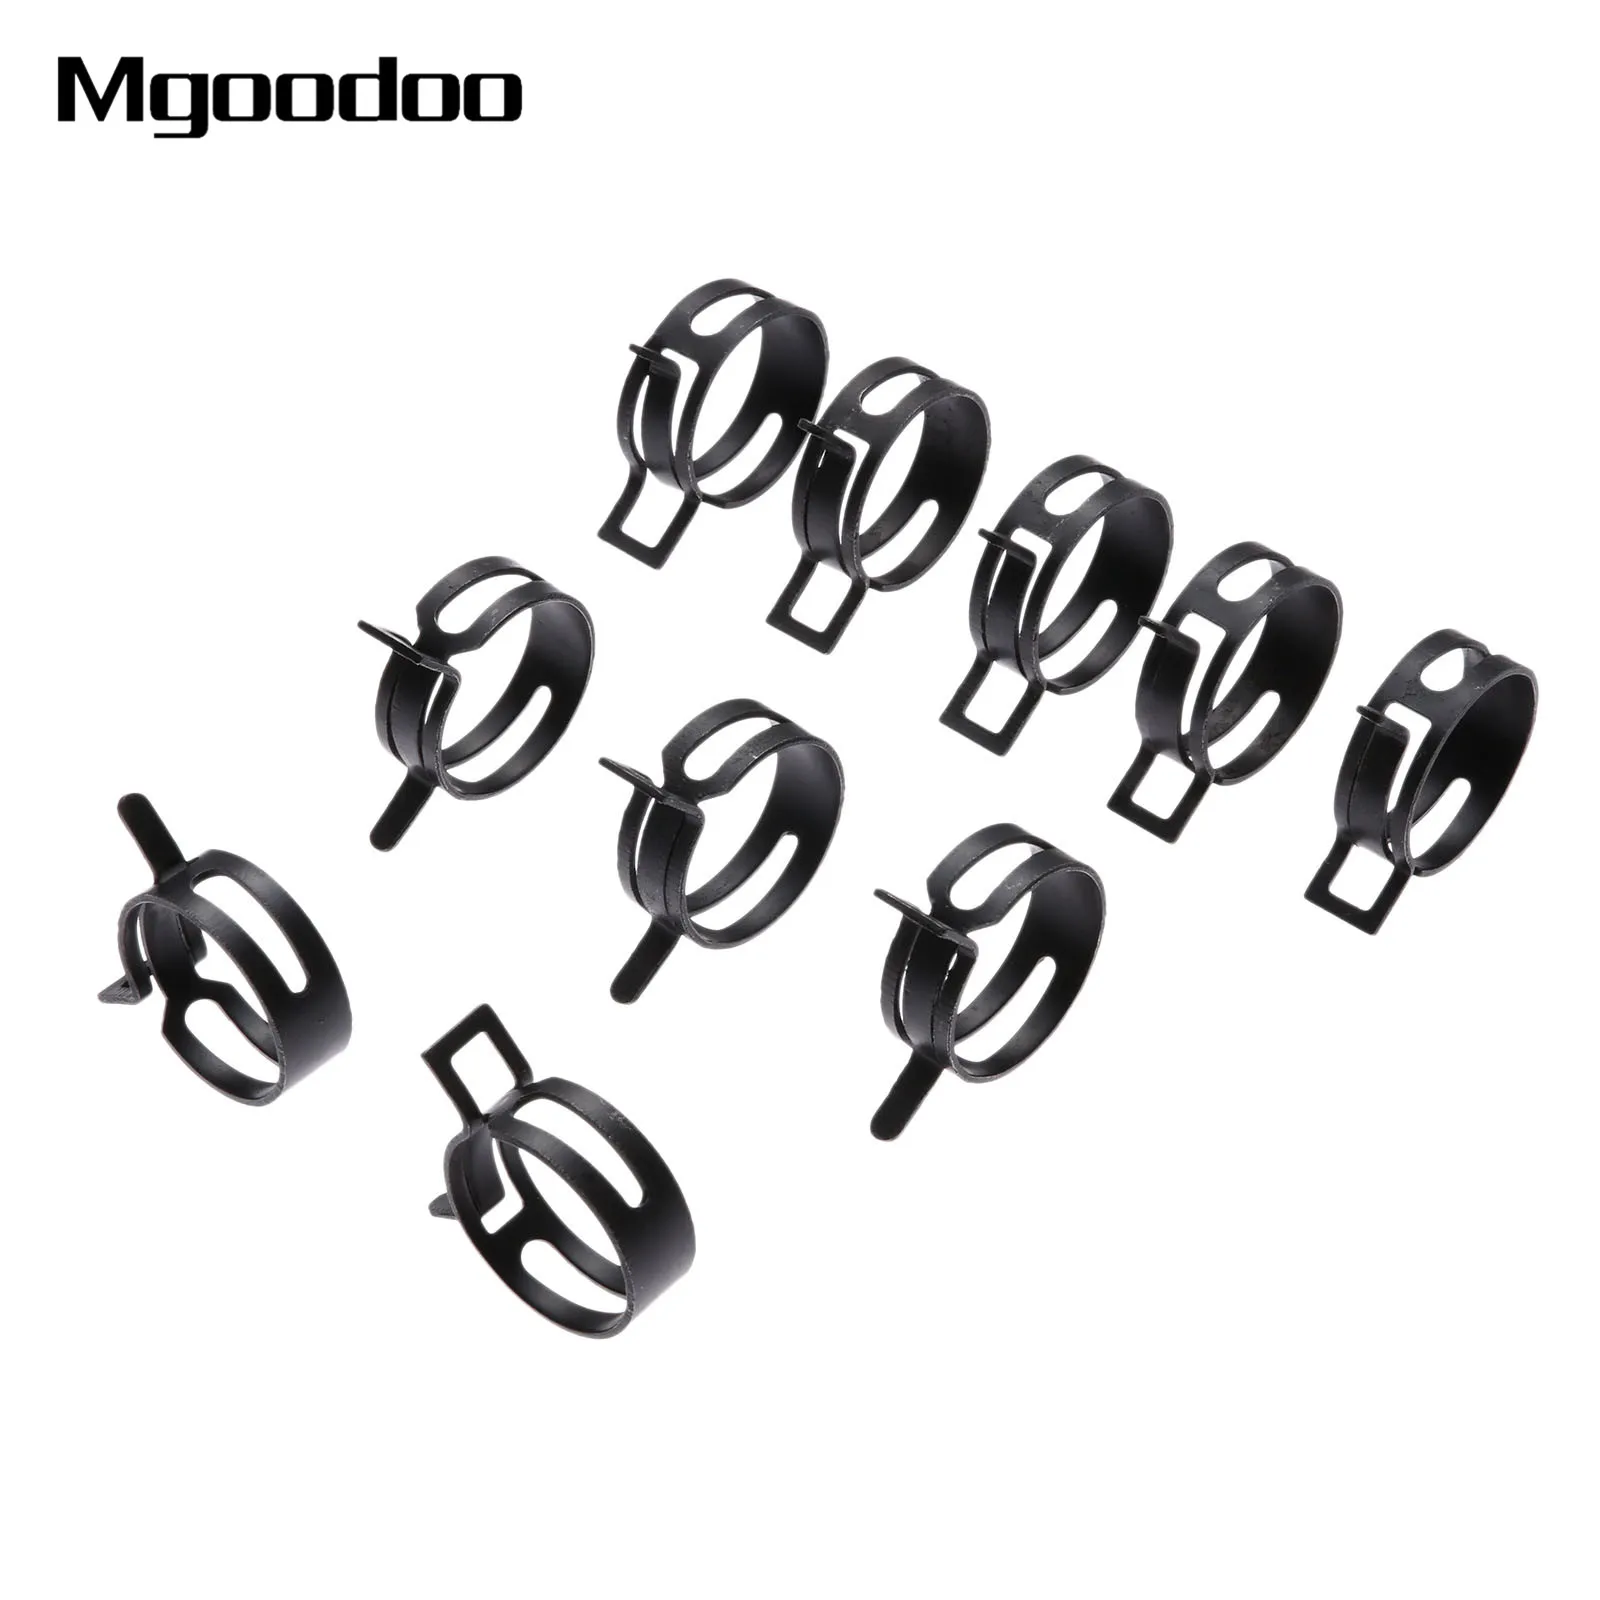 Mgoodoo 10Pcs 40mm Spring Band Type Fuel Vacuum Hose Pipe Tube Clamp Clip Clamps Auto Fastener For Audi Bmw Ford Honda Kia